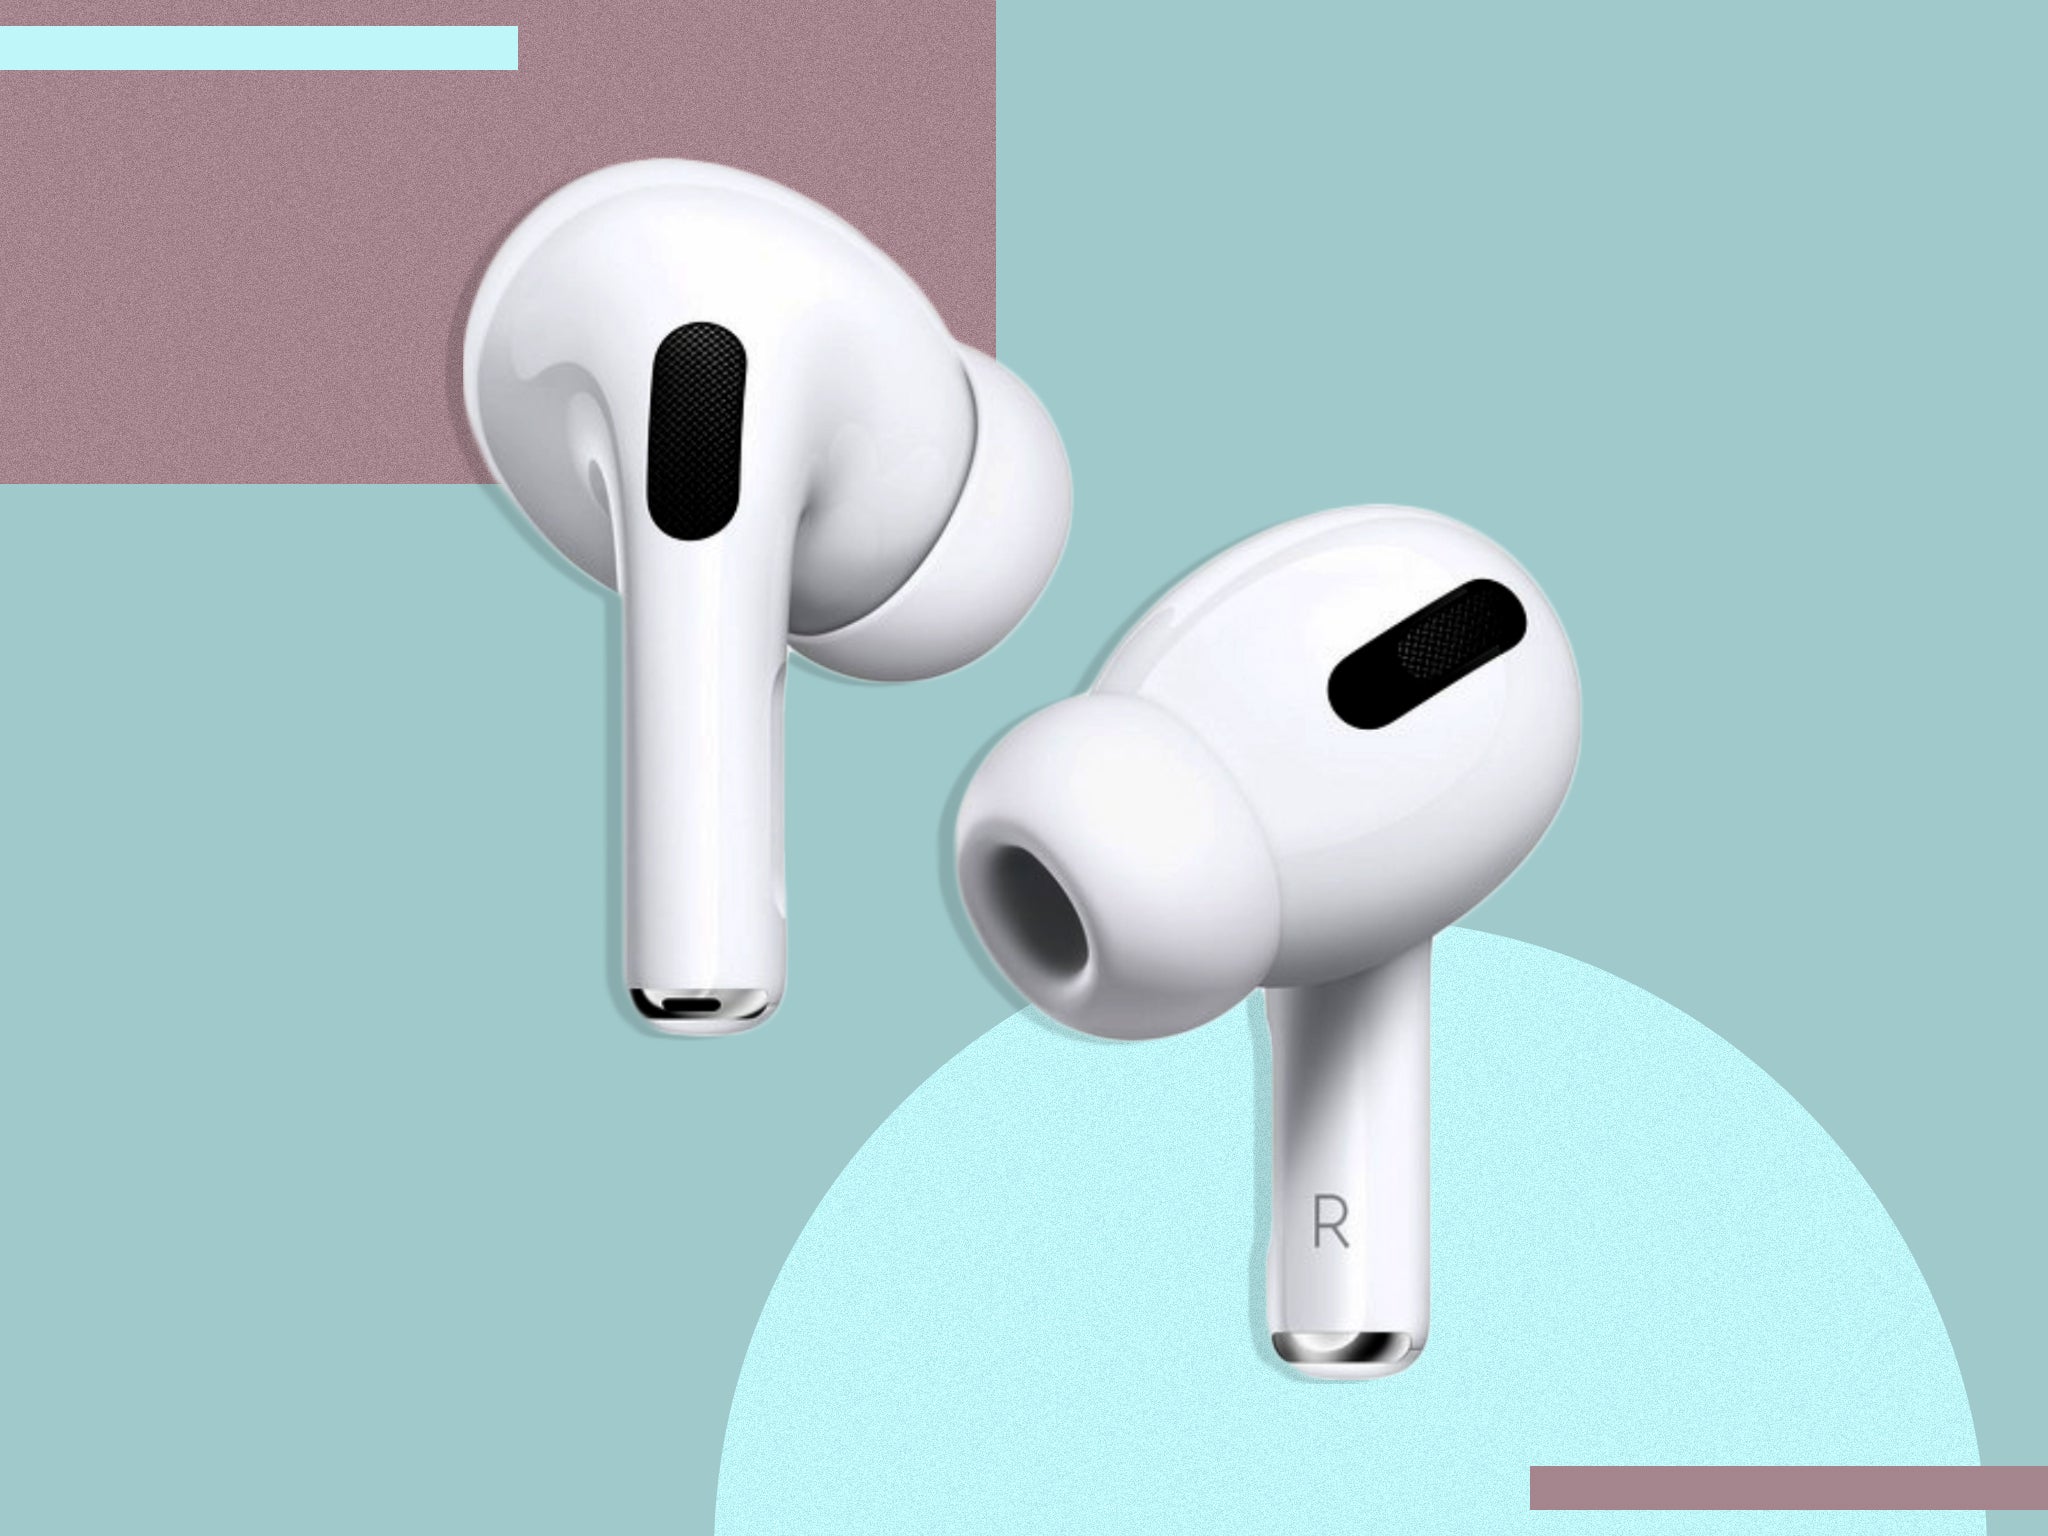 They certainly look the part, and fit nicely into the Apple ecosystem, but are they worth the extra investment over the AirPods?